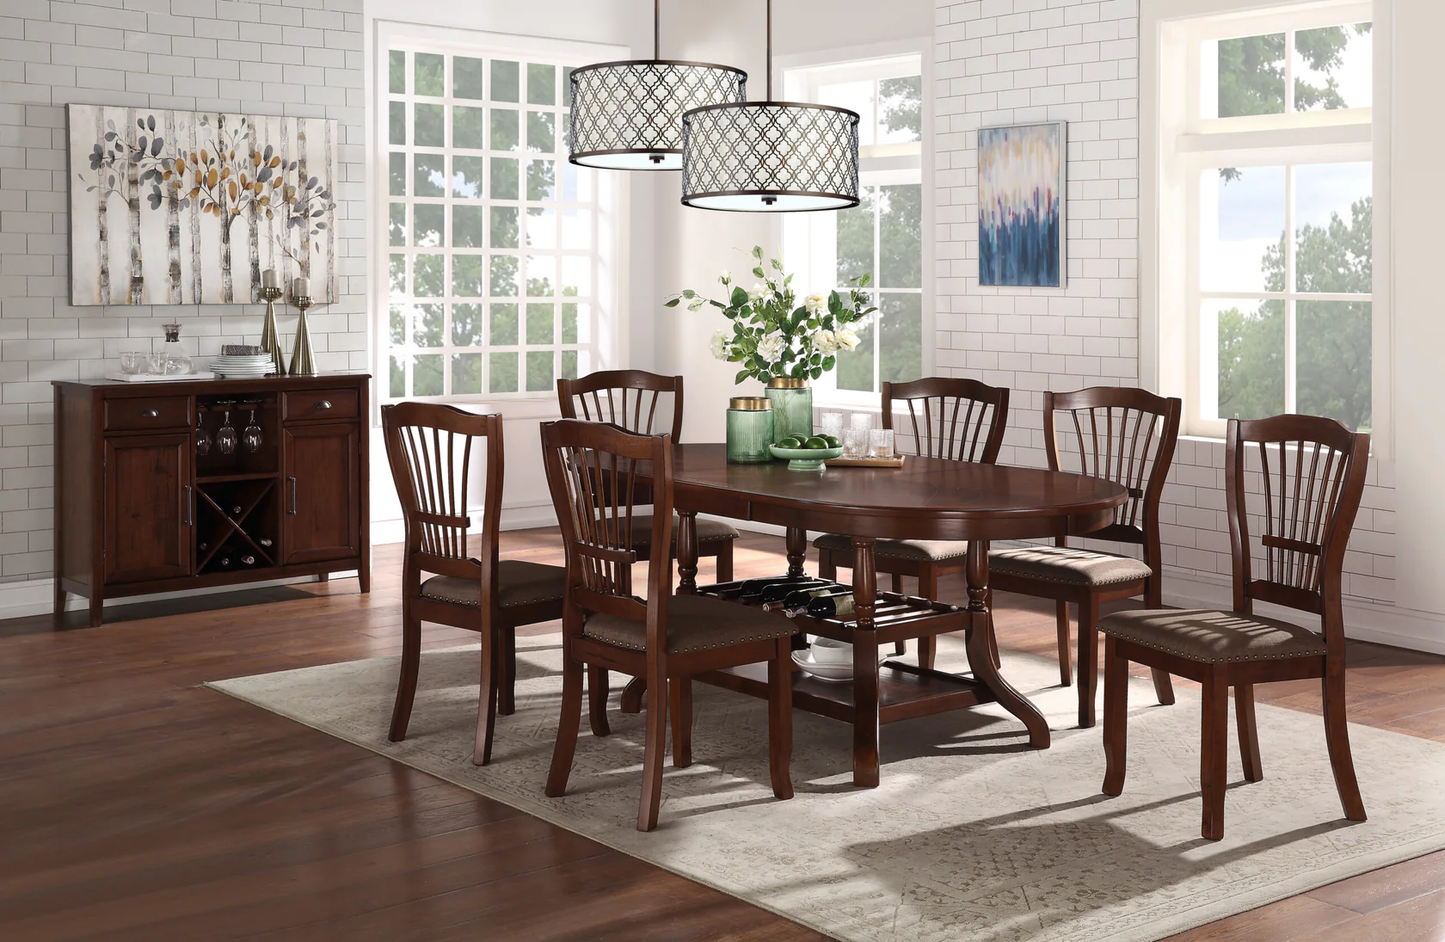 Bixby (Dining Table + 6 Chairs)